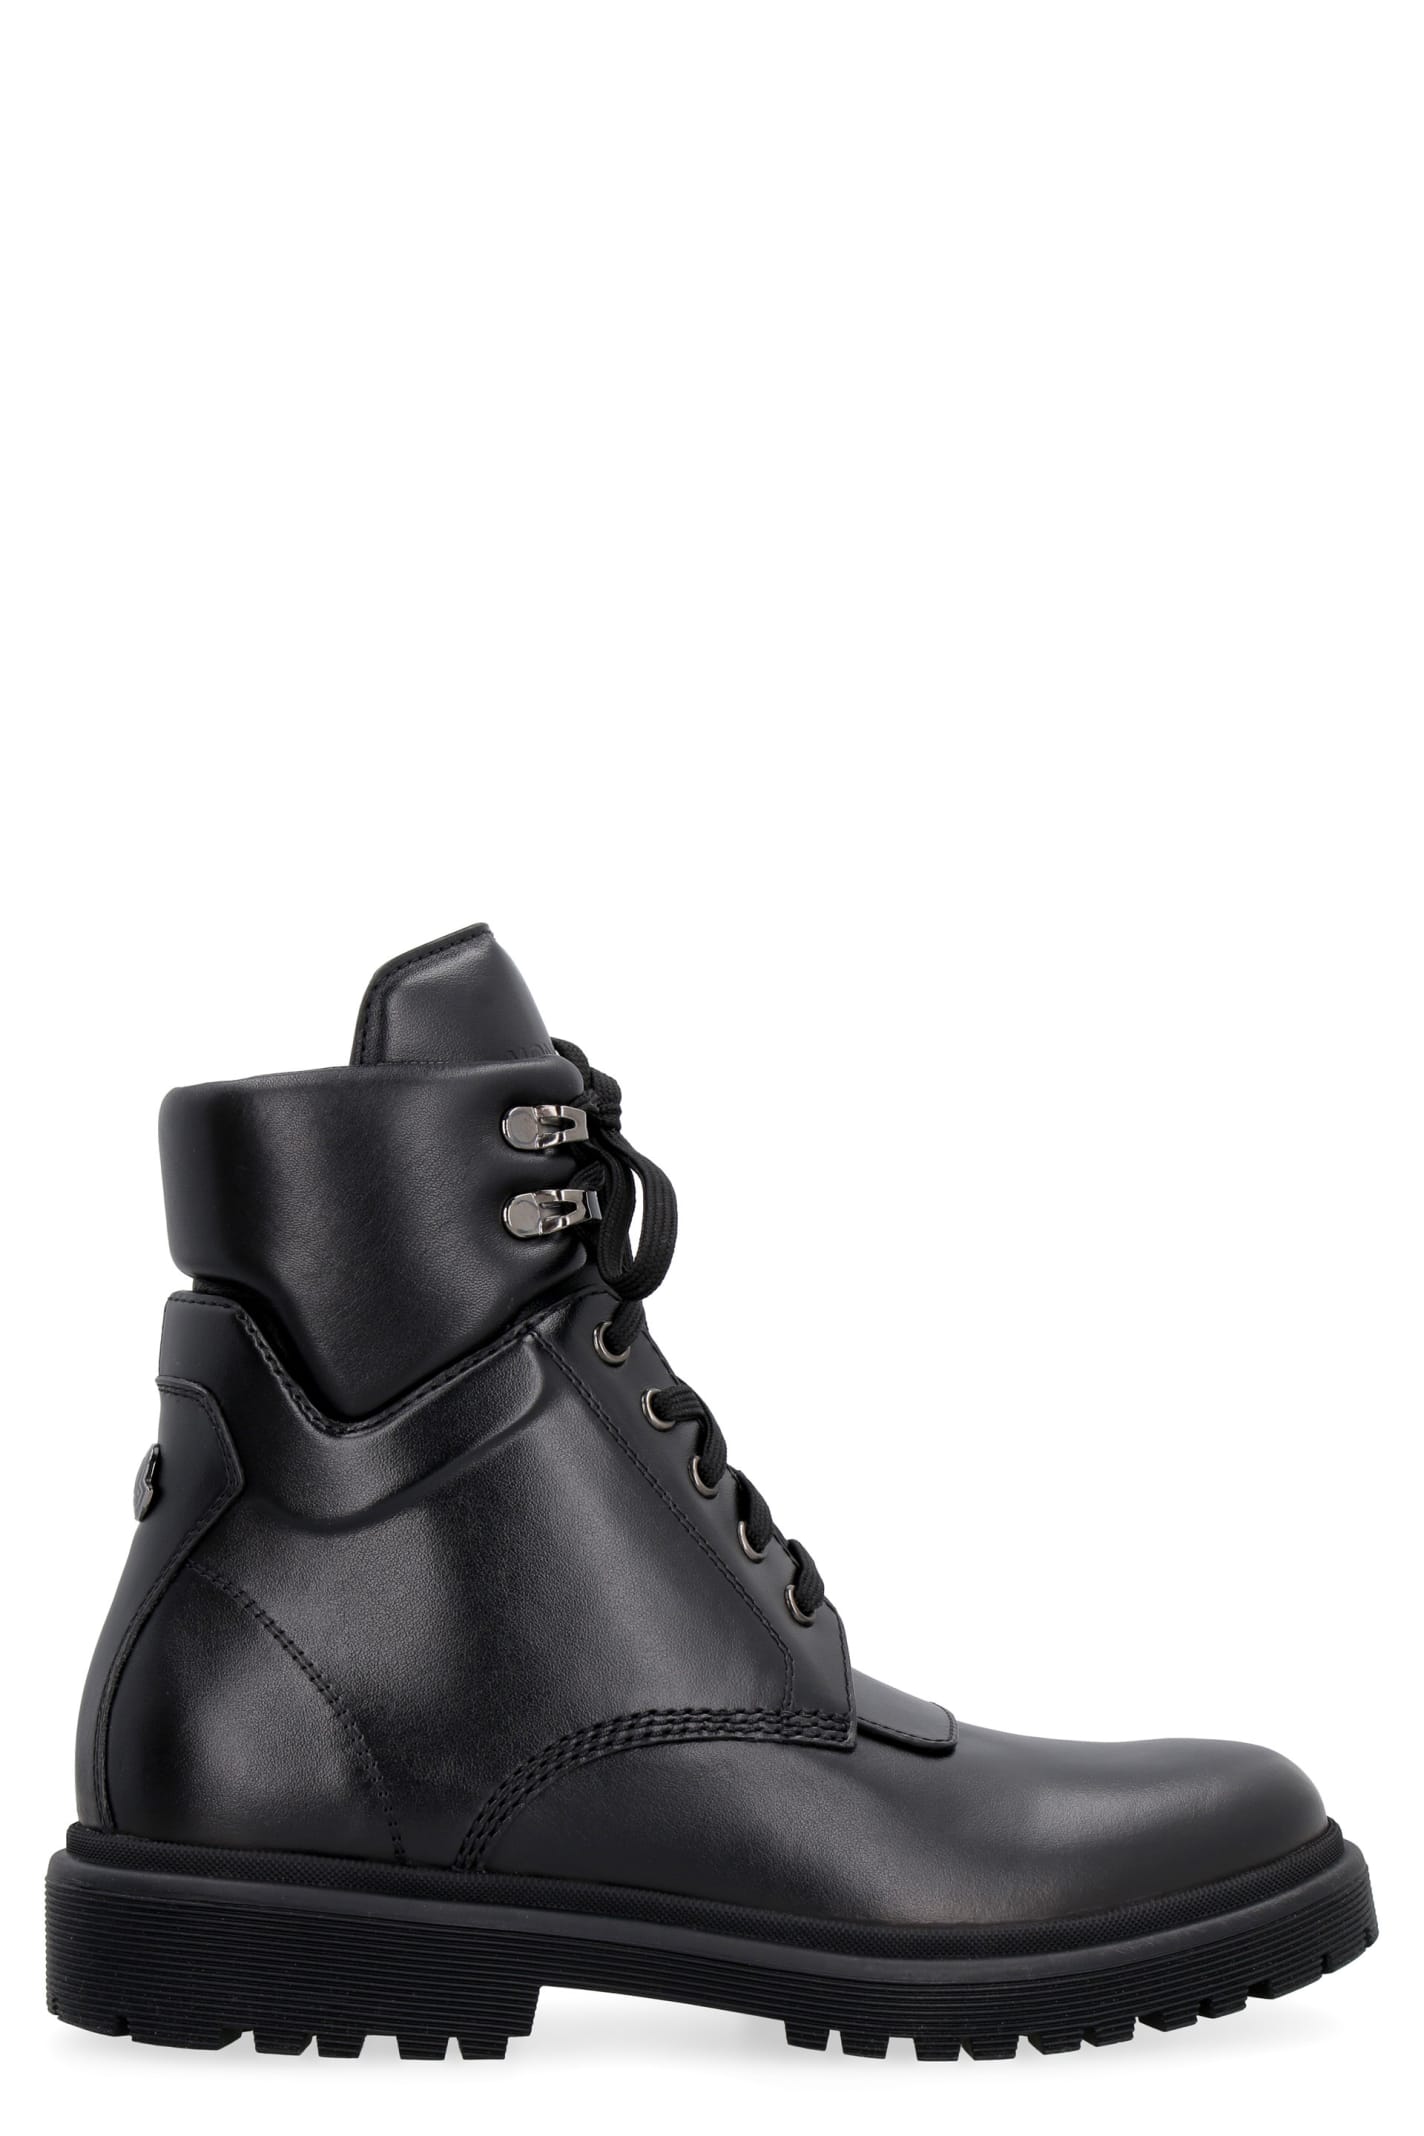 Buy Moncler Patty Leather Ankle Boots online, shop Moncler shoes with free shipping